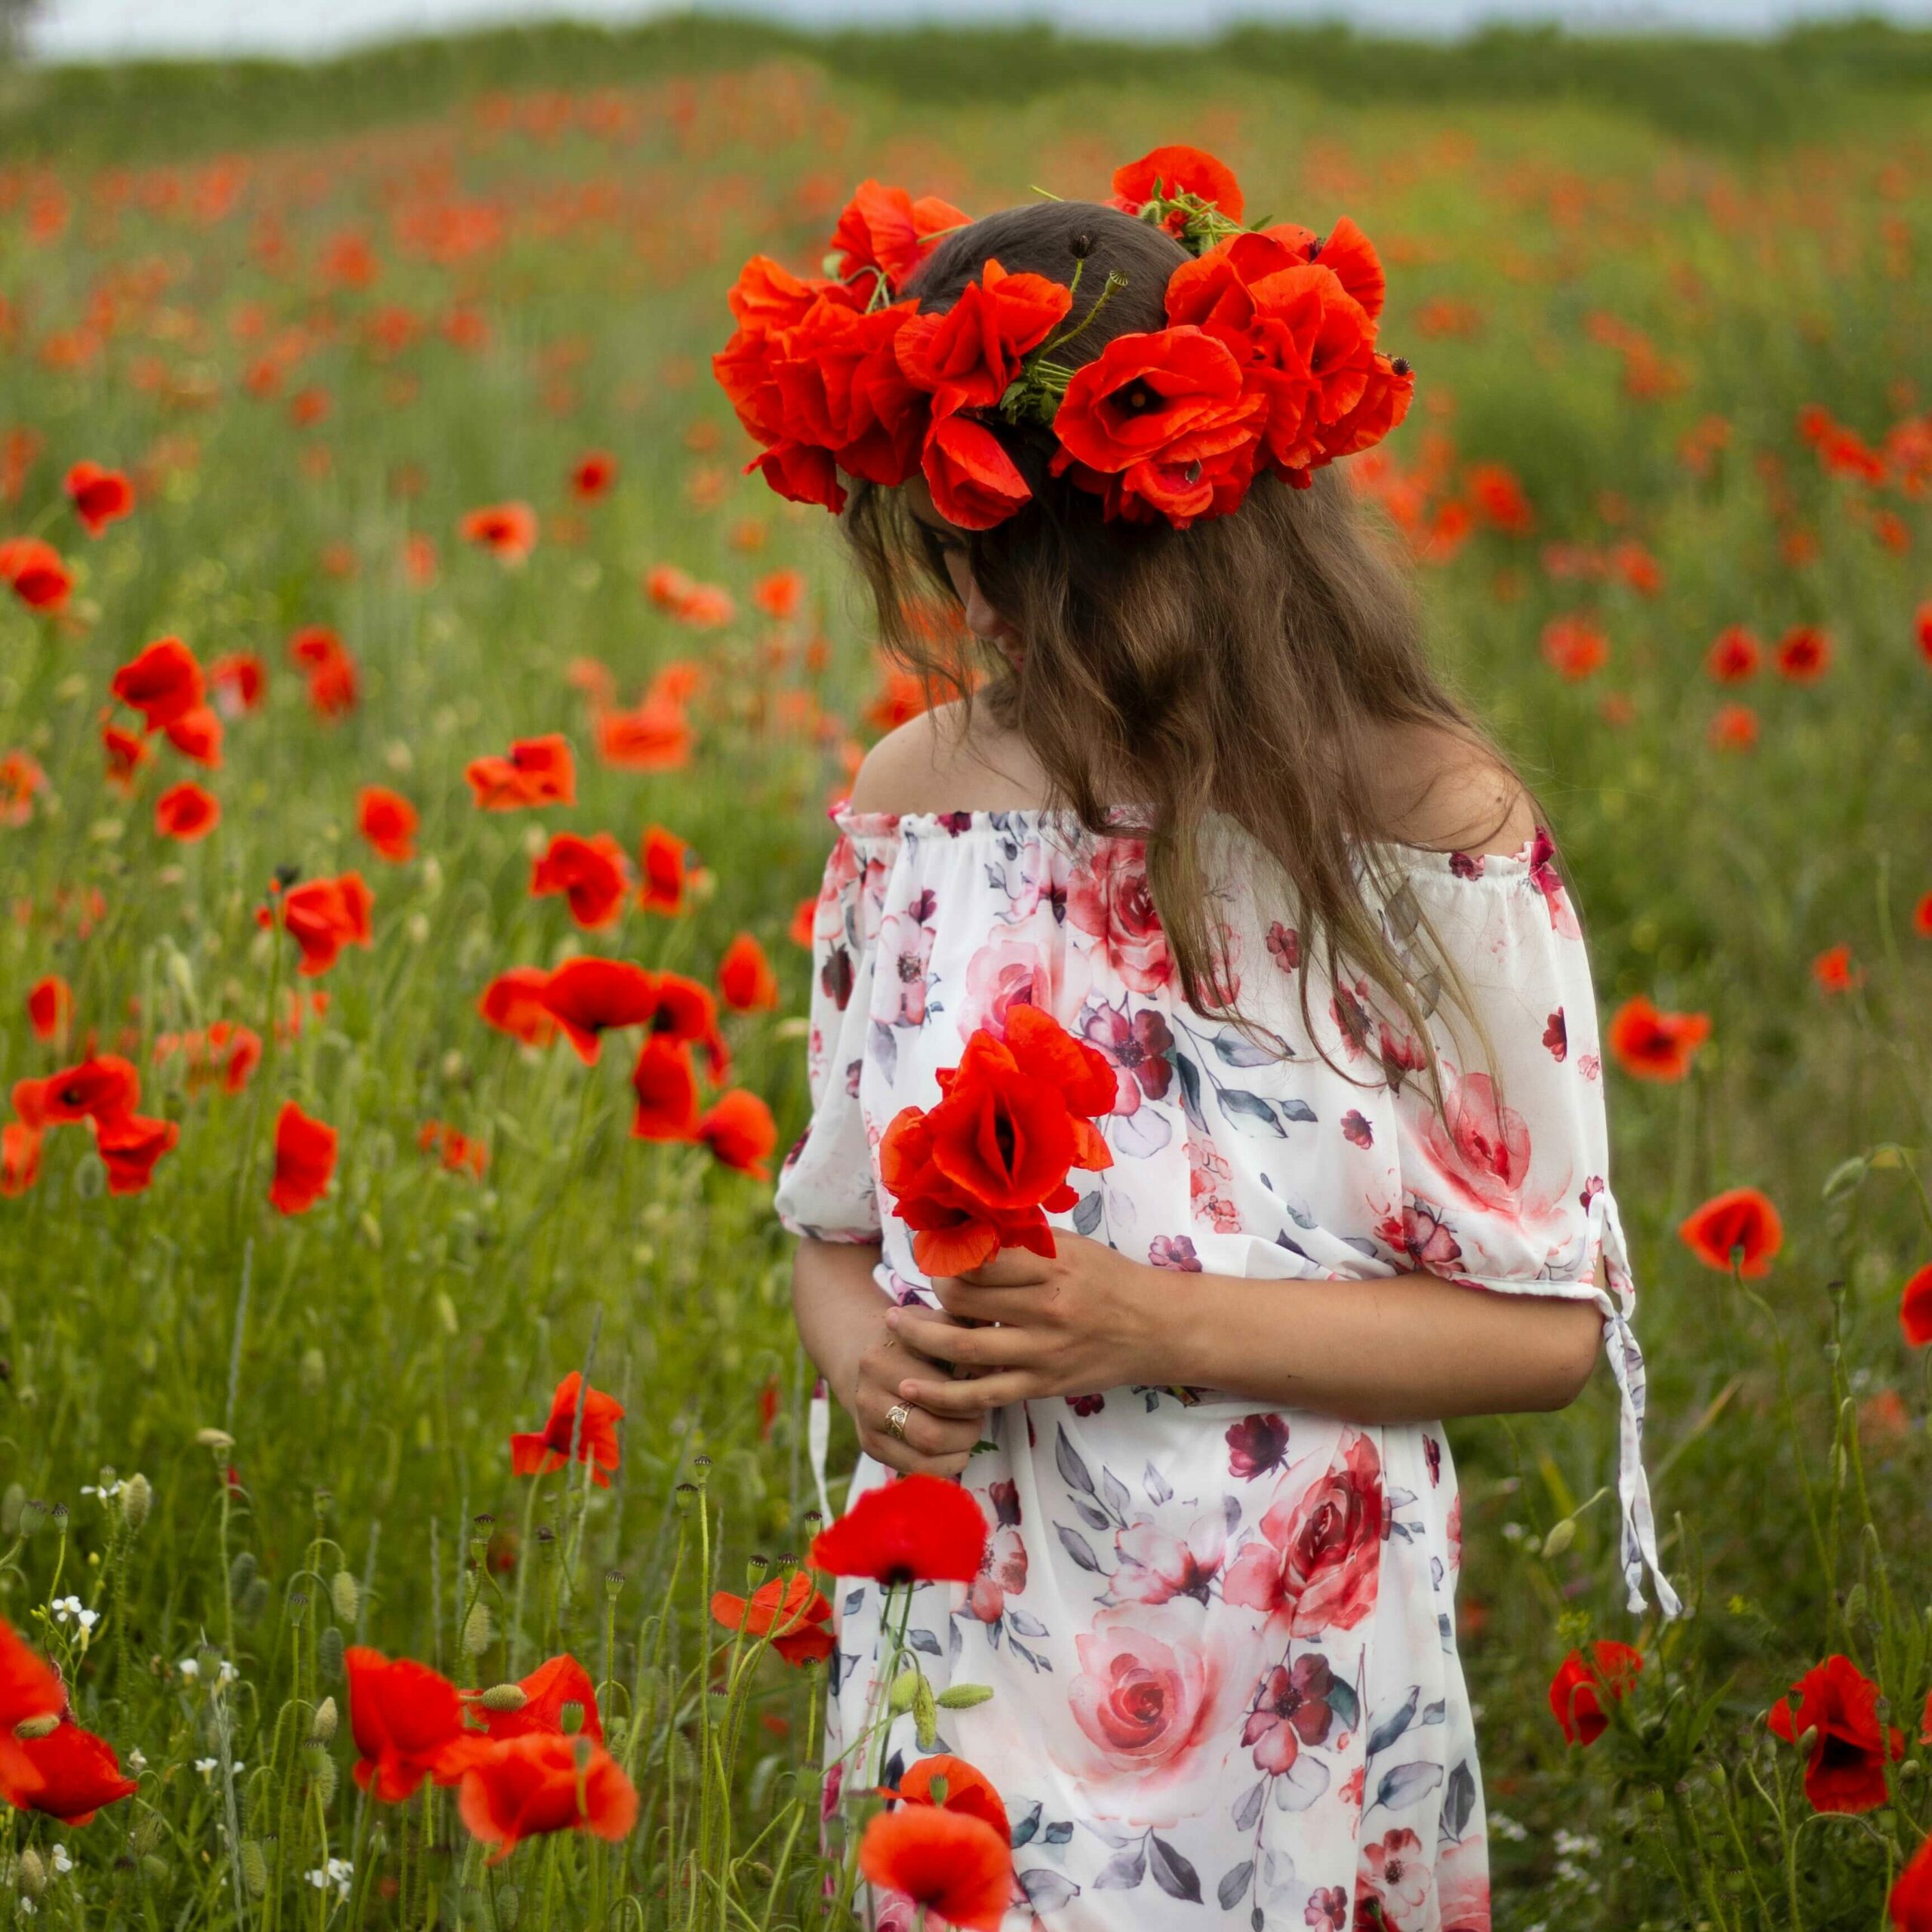 Woman standing in a field of red flowers wearing a flower crown and white floral dress.